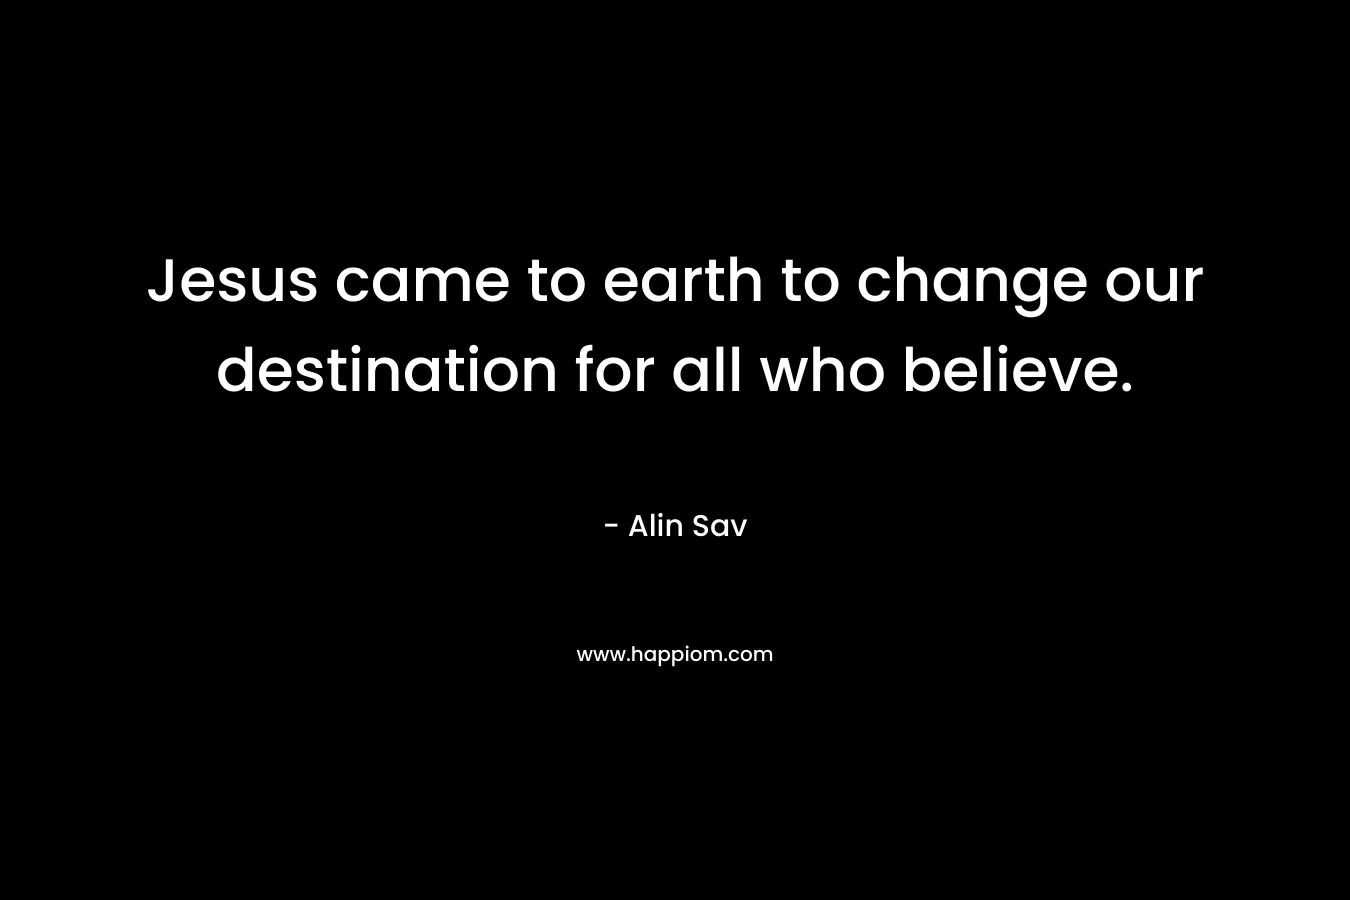 Jesus came to earth to change our destination for all who believe.